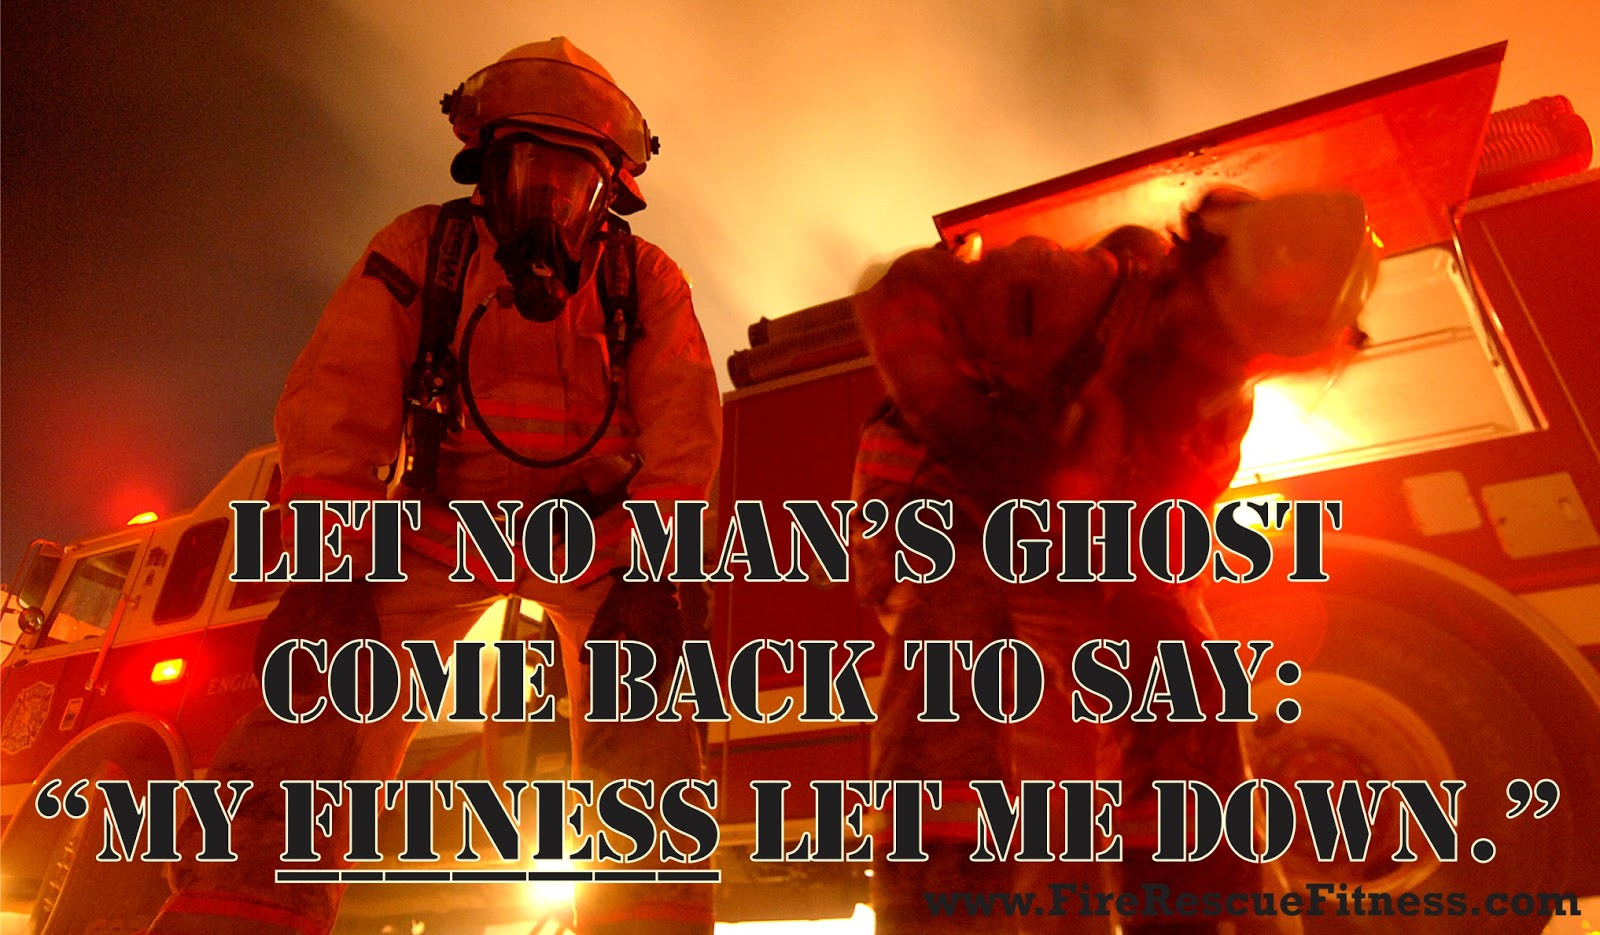 Firefighter Inspirational Quotes
 Firefighter Inspirational Quotes QuotesGram